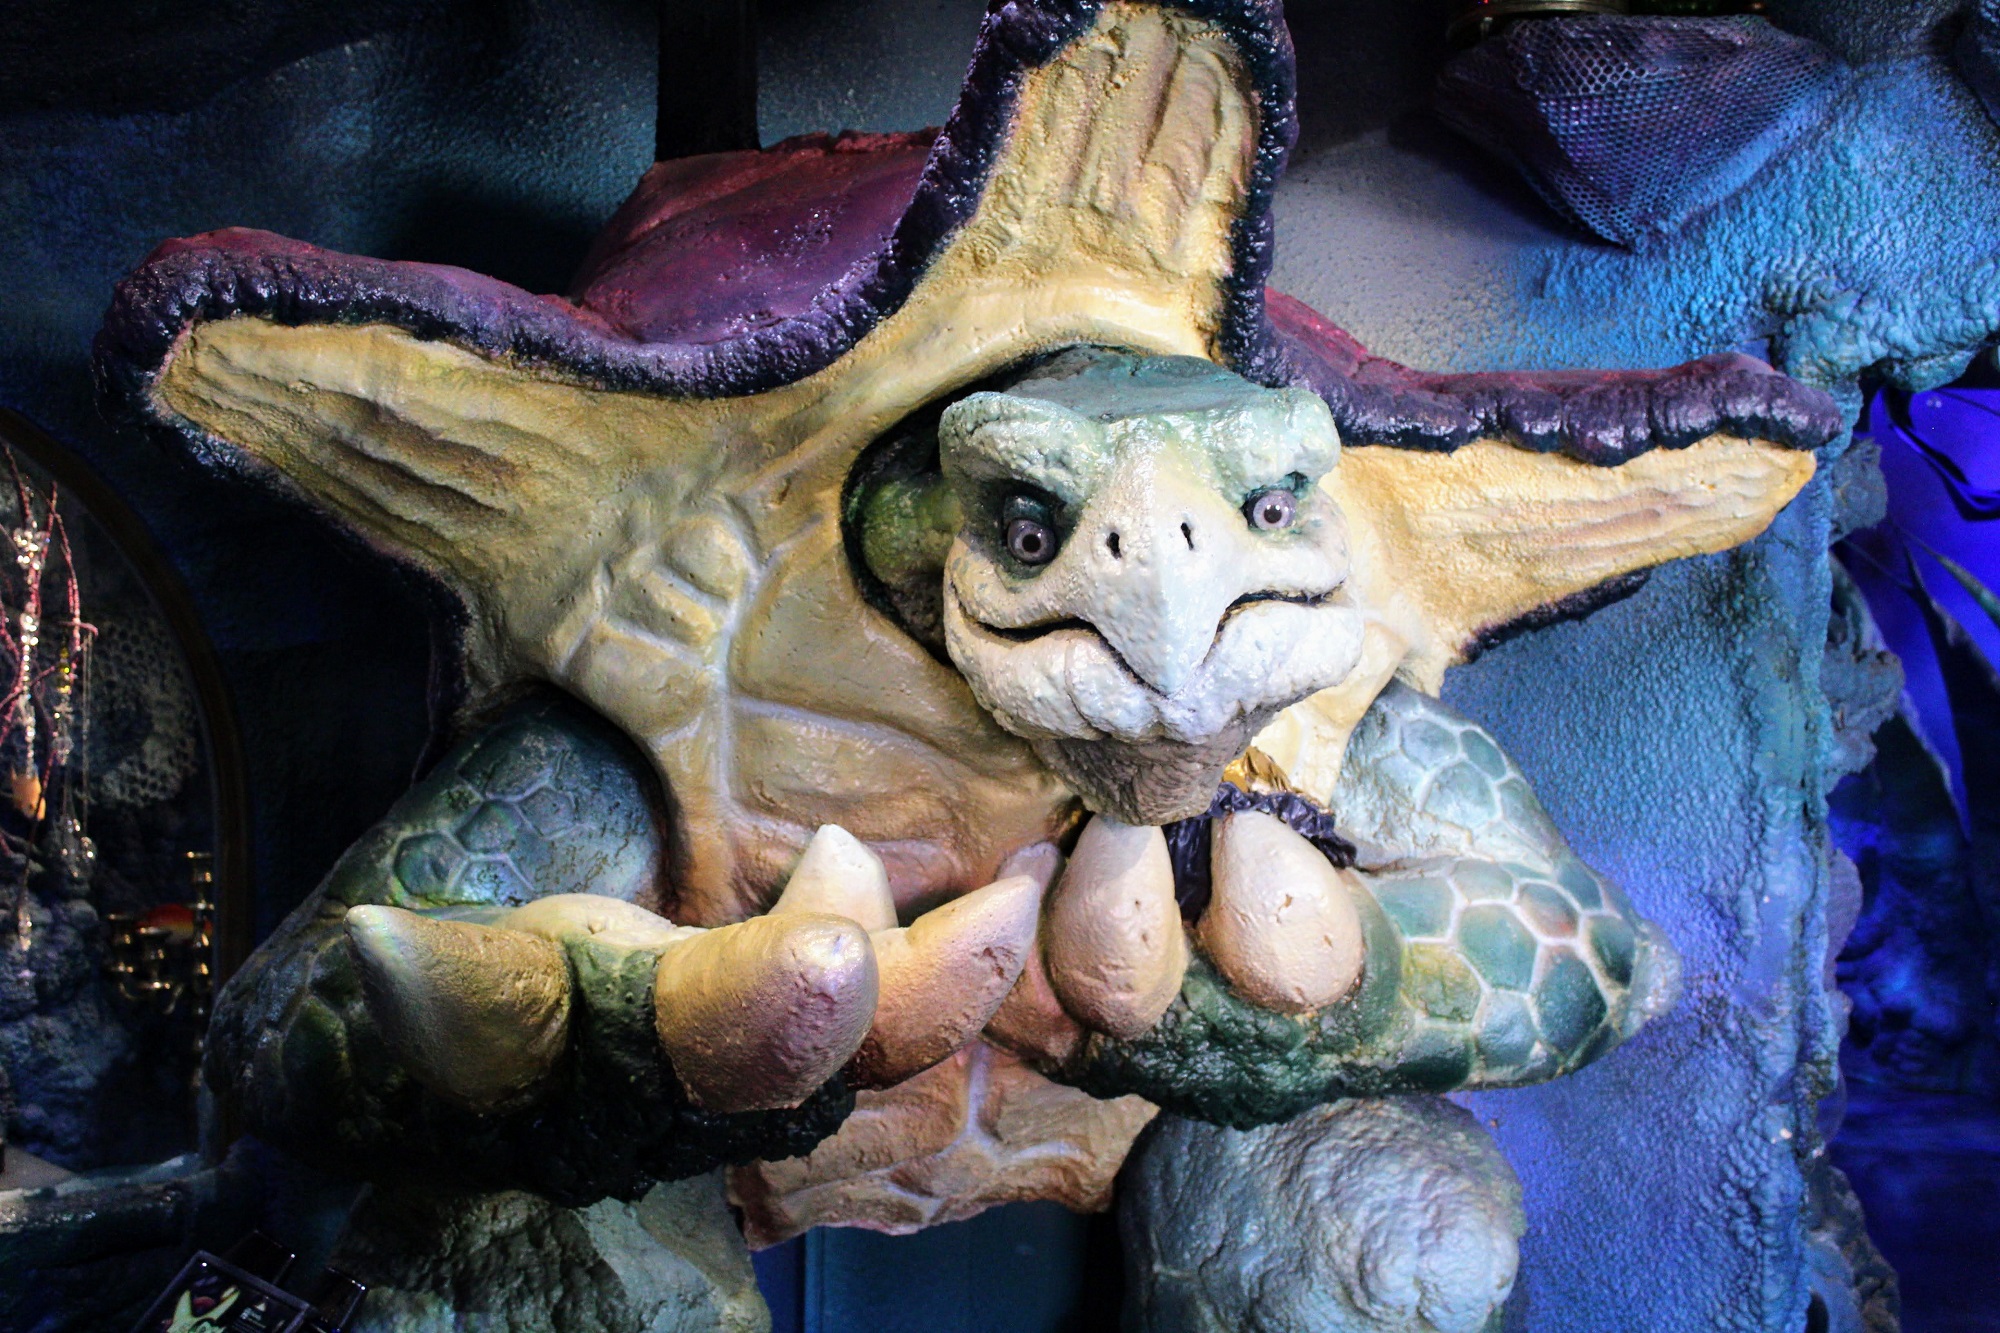 Swindly is a 9-foot-tall turtle with a starfish-shaped shell who resides in Wizard Quest’s water realm as the pawn shop merchant. He was constructed by siblings Cassie Ricks and Braden Ricks. (Trina La Susa/WPR)